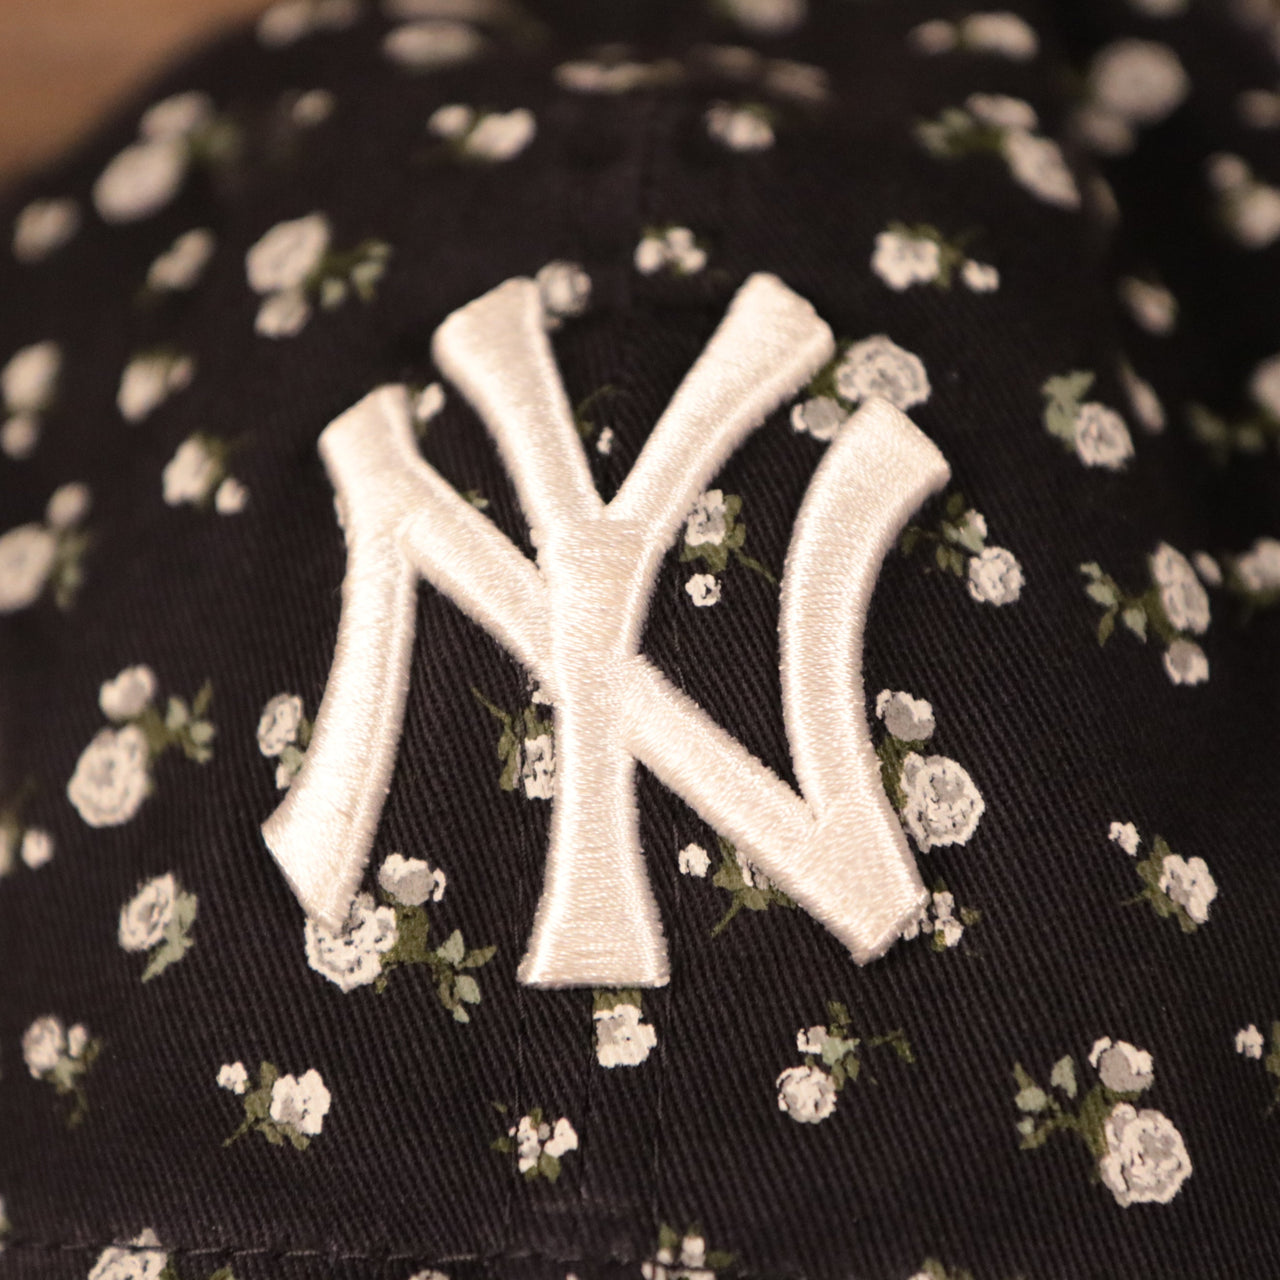 The white New York Yankees logo patch on the front side of the New Era floral baseball cap.